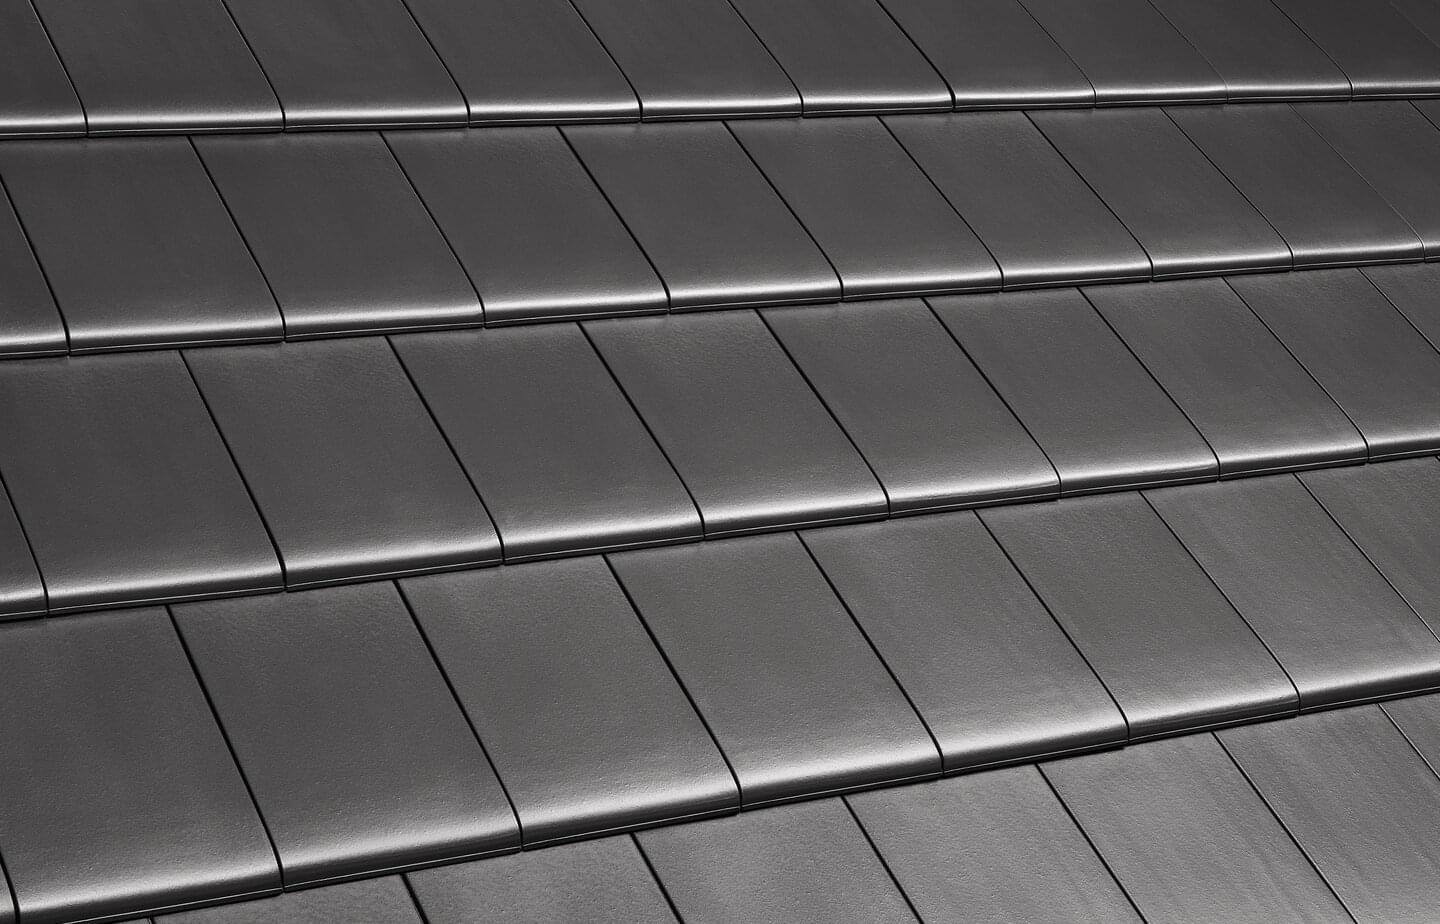 Linea® - Sinter grey | Image roof surface | © © ERLUS AG 2021